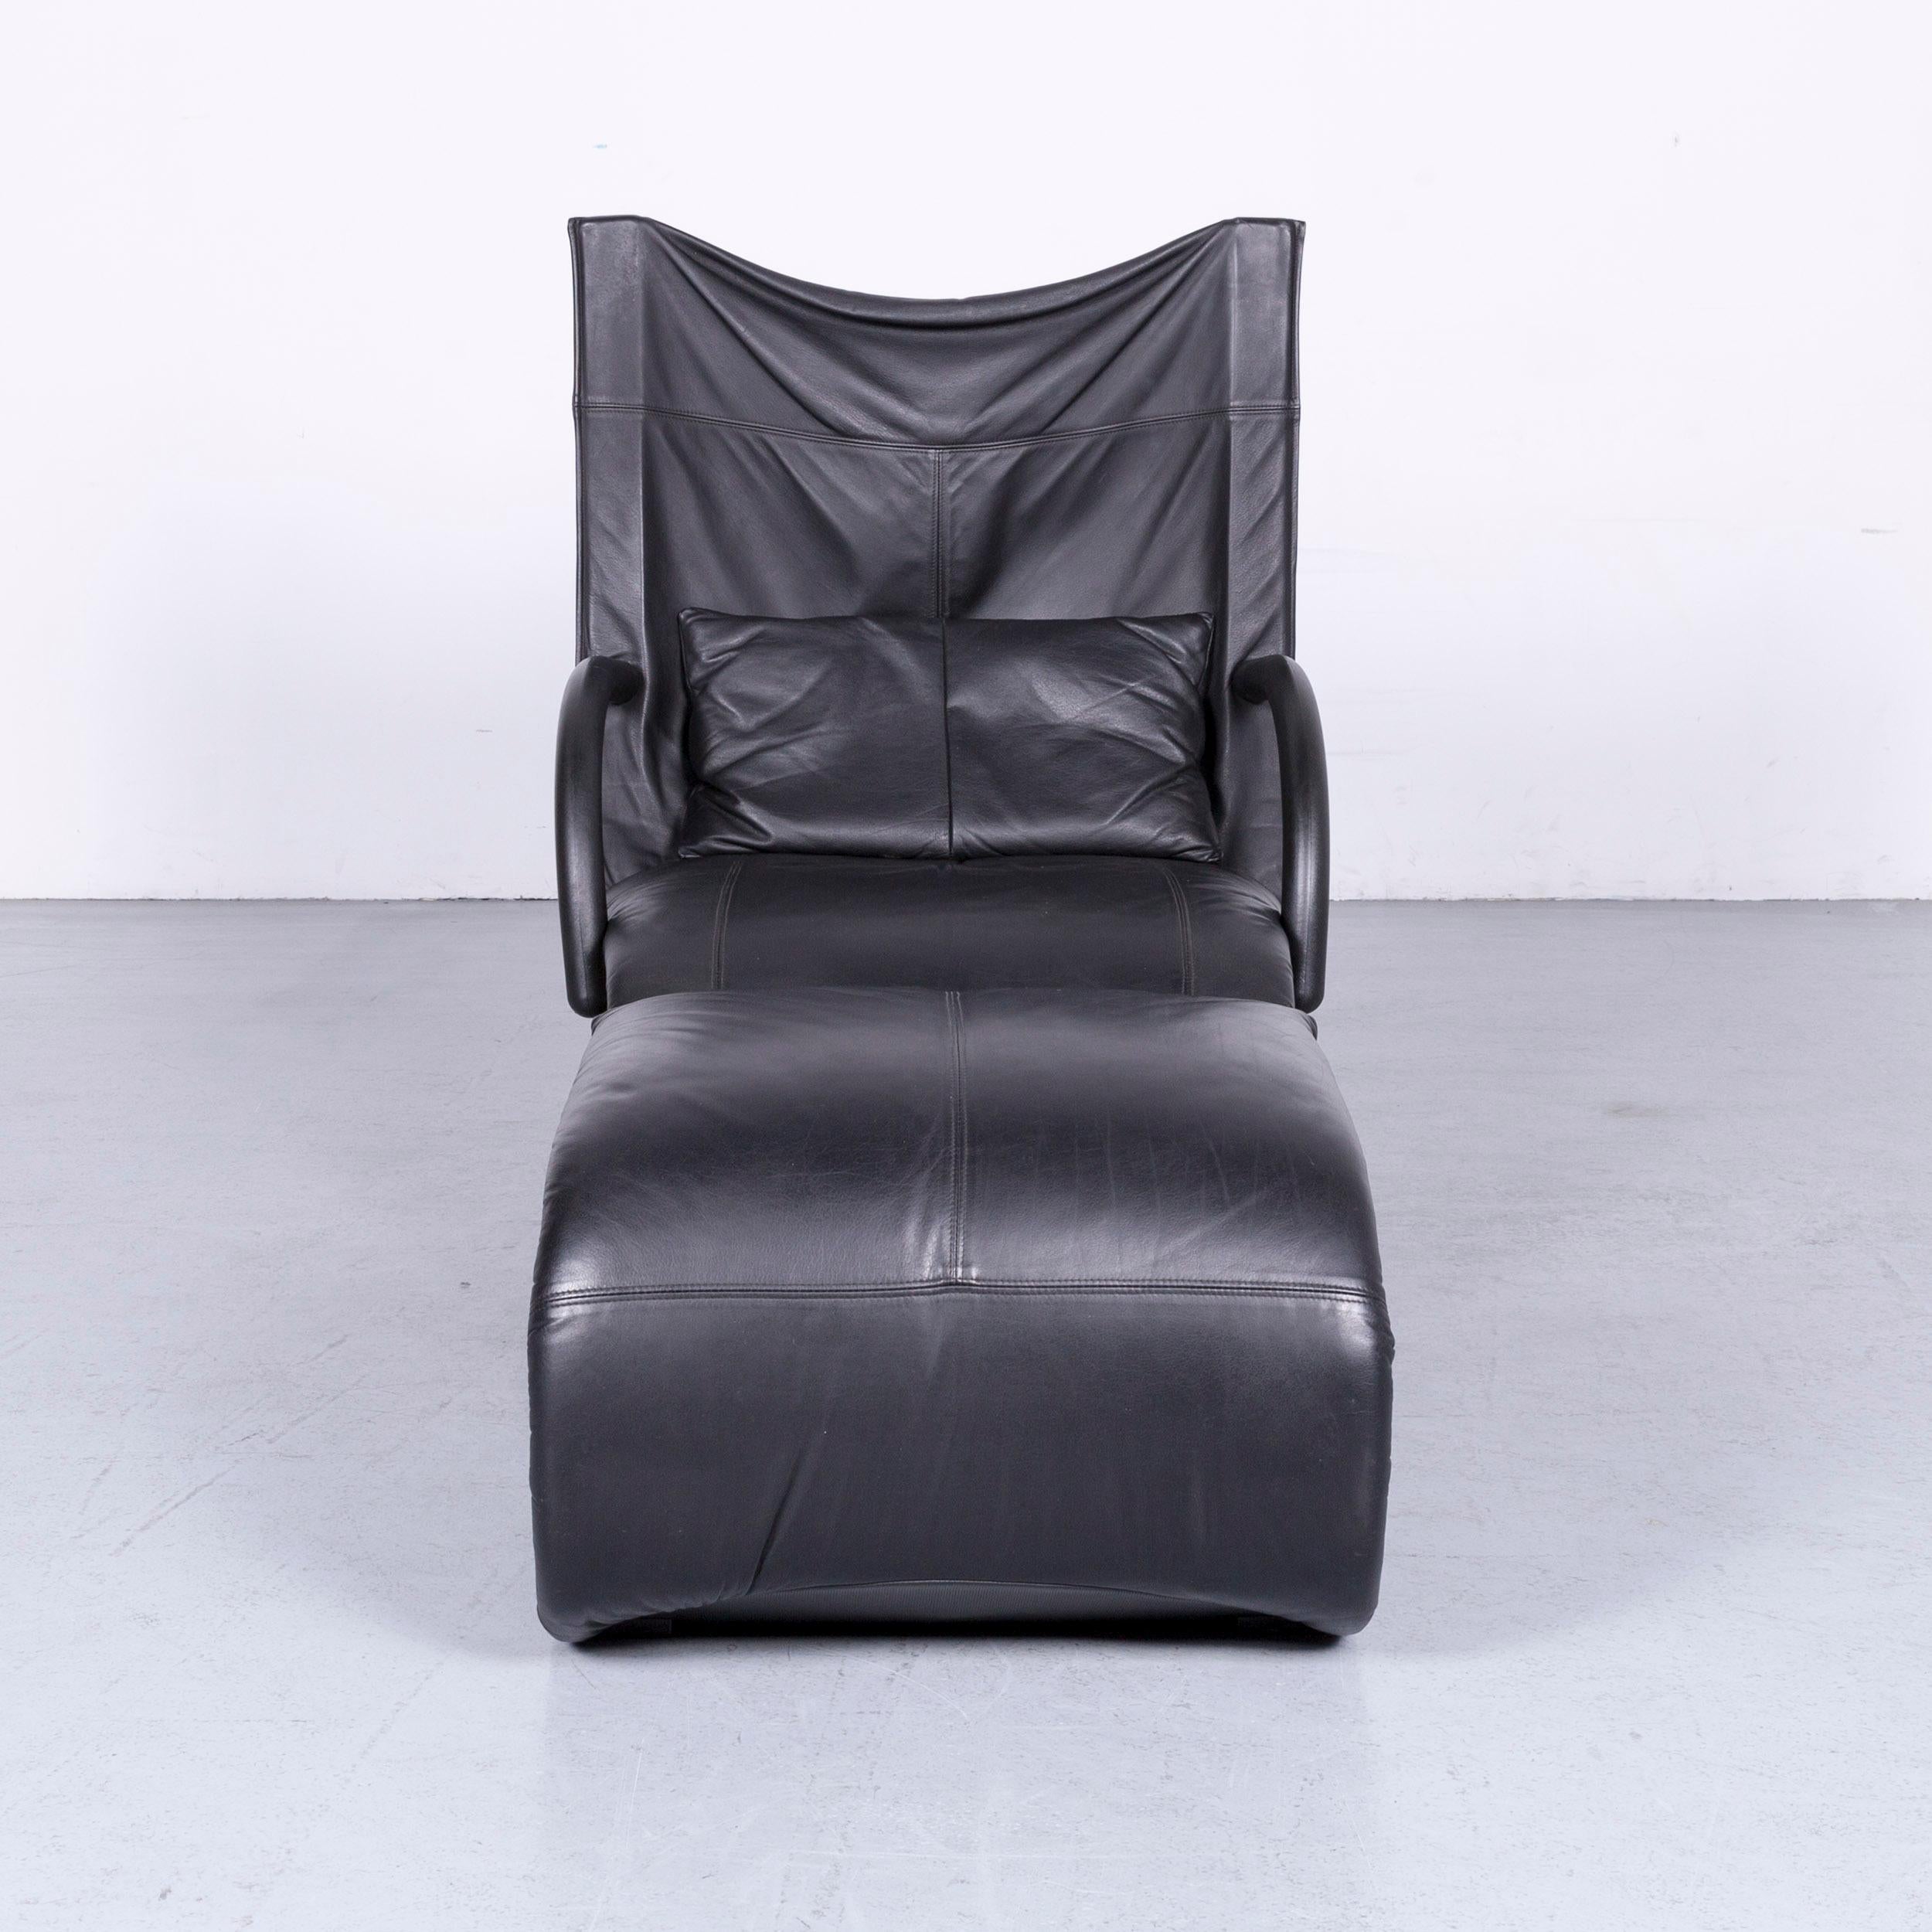 We bring to you a Ligne Roset designer leather armchair black genuine leather chair stool.

Product measurements in centimeters:

Depth 70
Width 75
Height 105
Seat-height 40
Rest-height 60
Seat-depth 66
Seat-width 63
Back-height